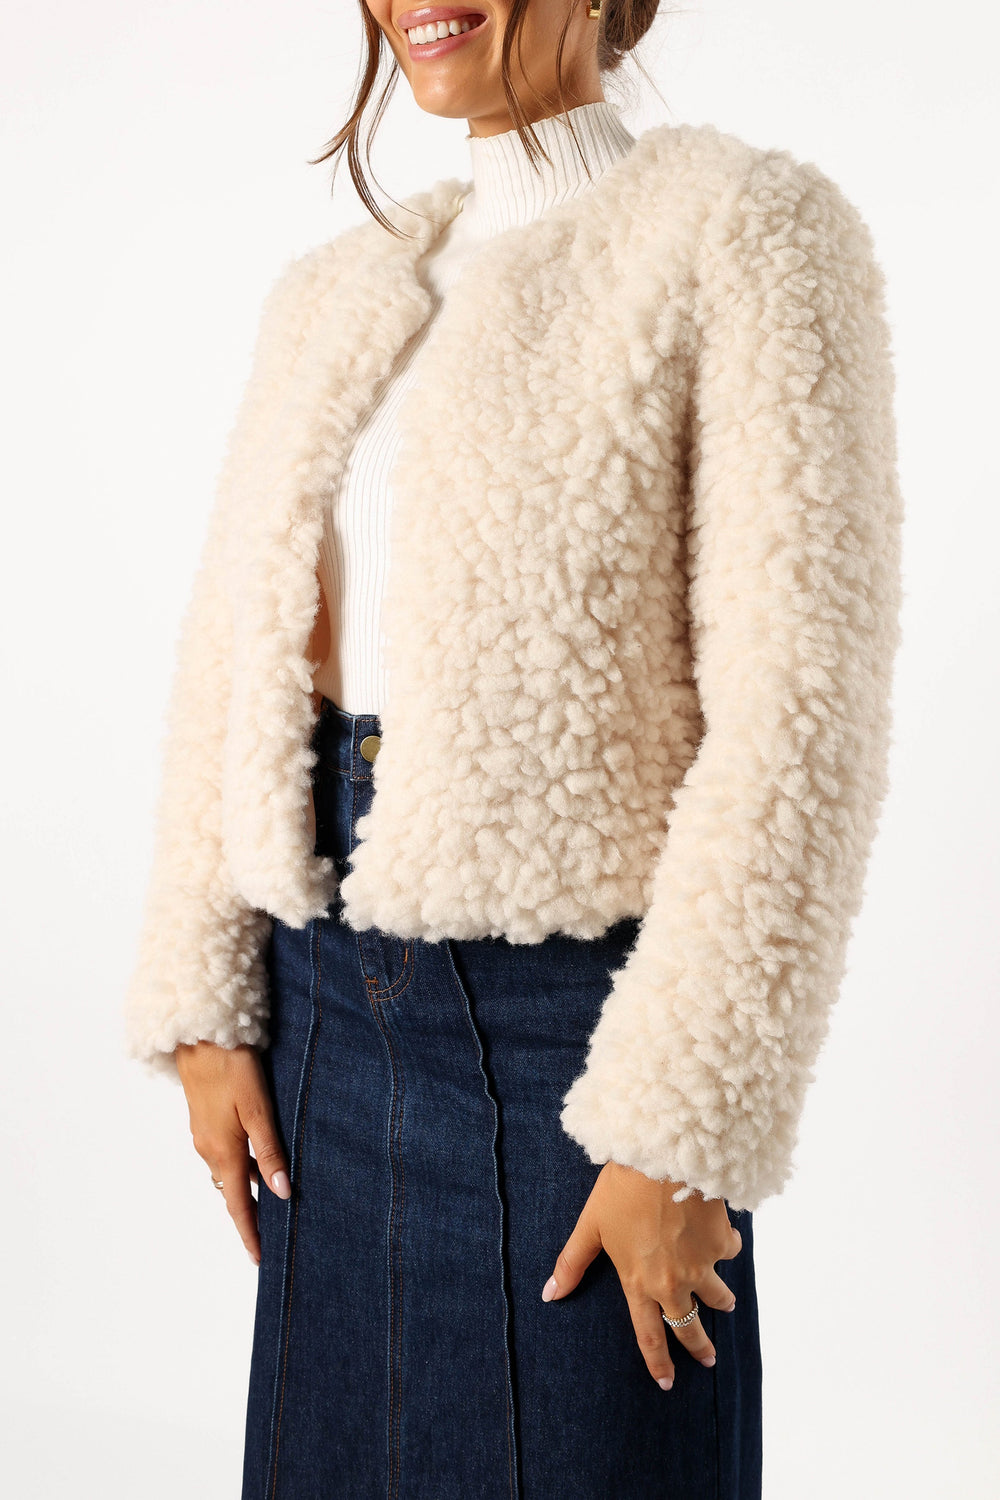 Petal and Pup USA OUTERWEAR Haisley Faux Fur Jacket - Cream